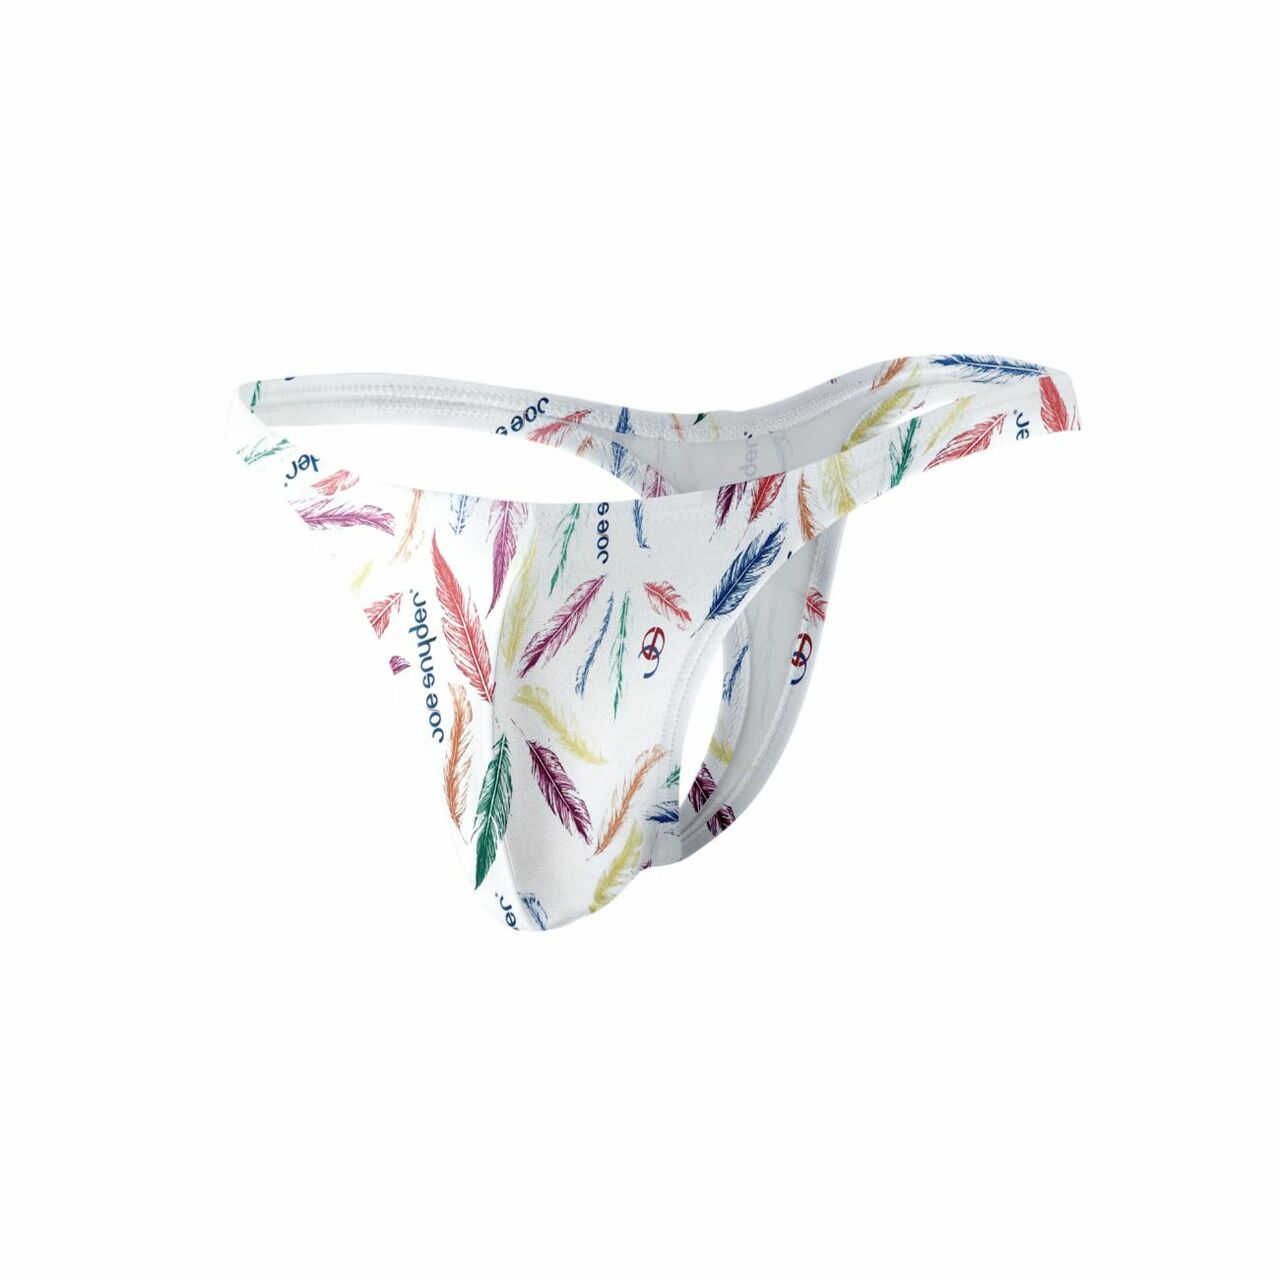 JCSTK - Joe Snyder Mens Polyester Thong Feathers